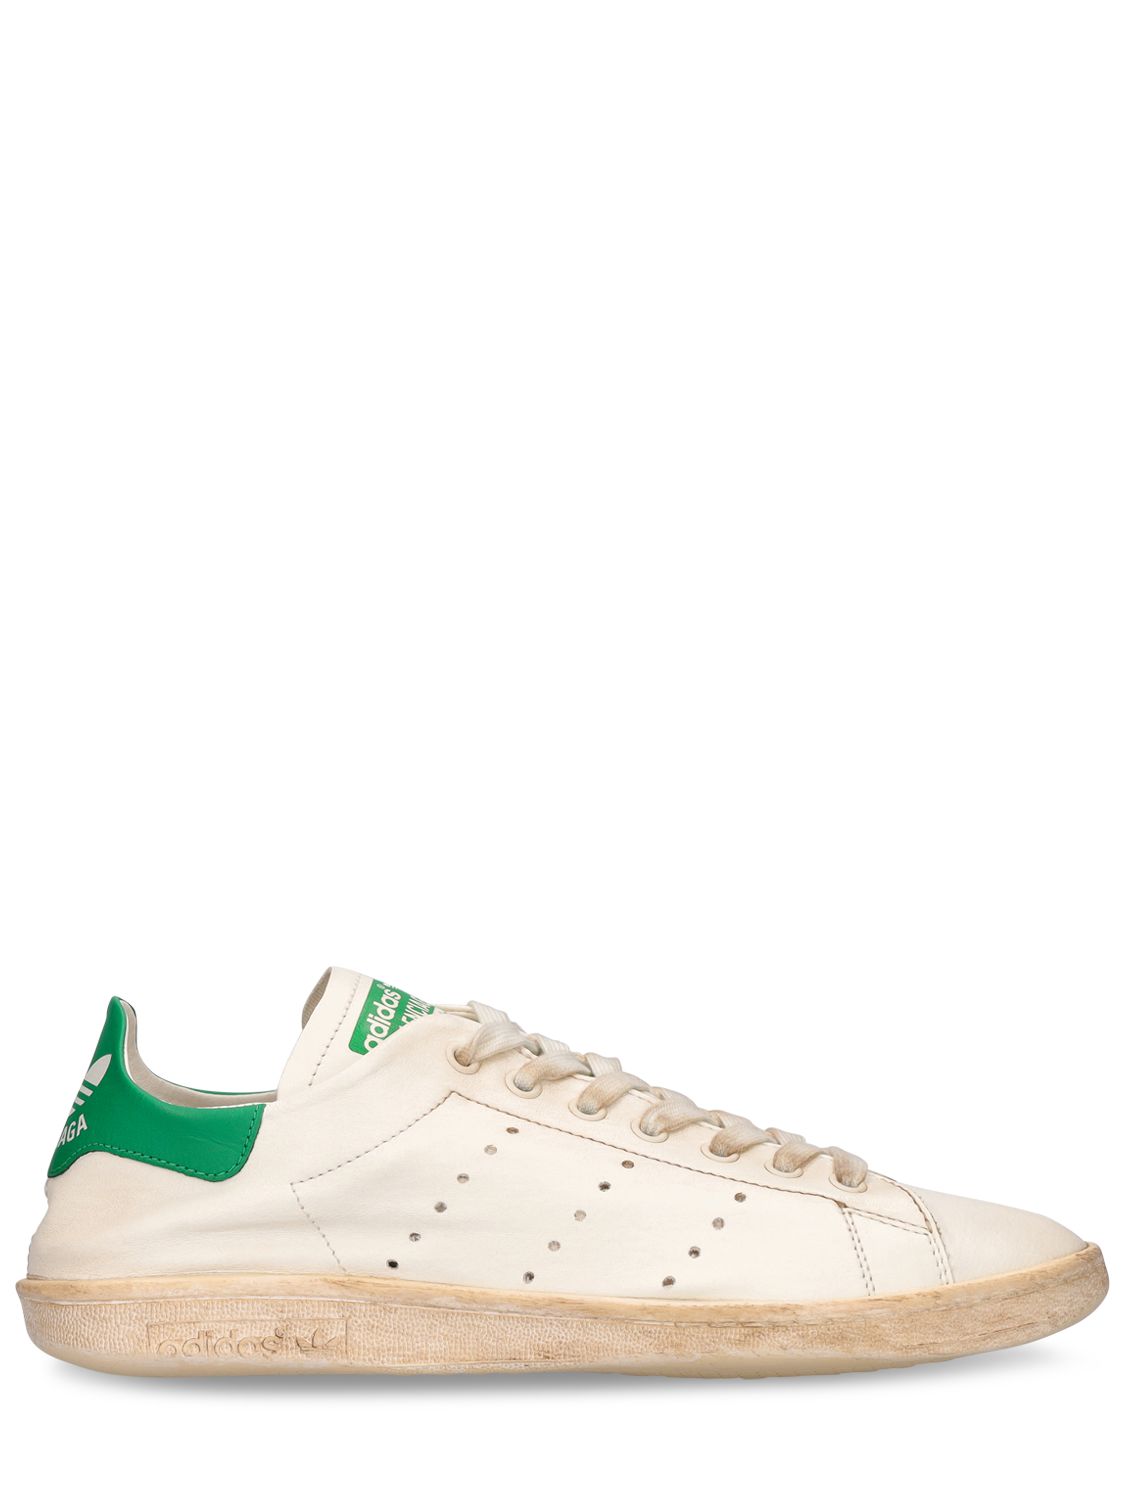 Balenciaga 20mm Stan Smith Leather Sneakers In White,green